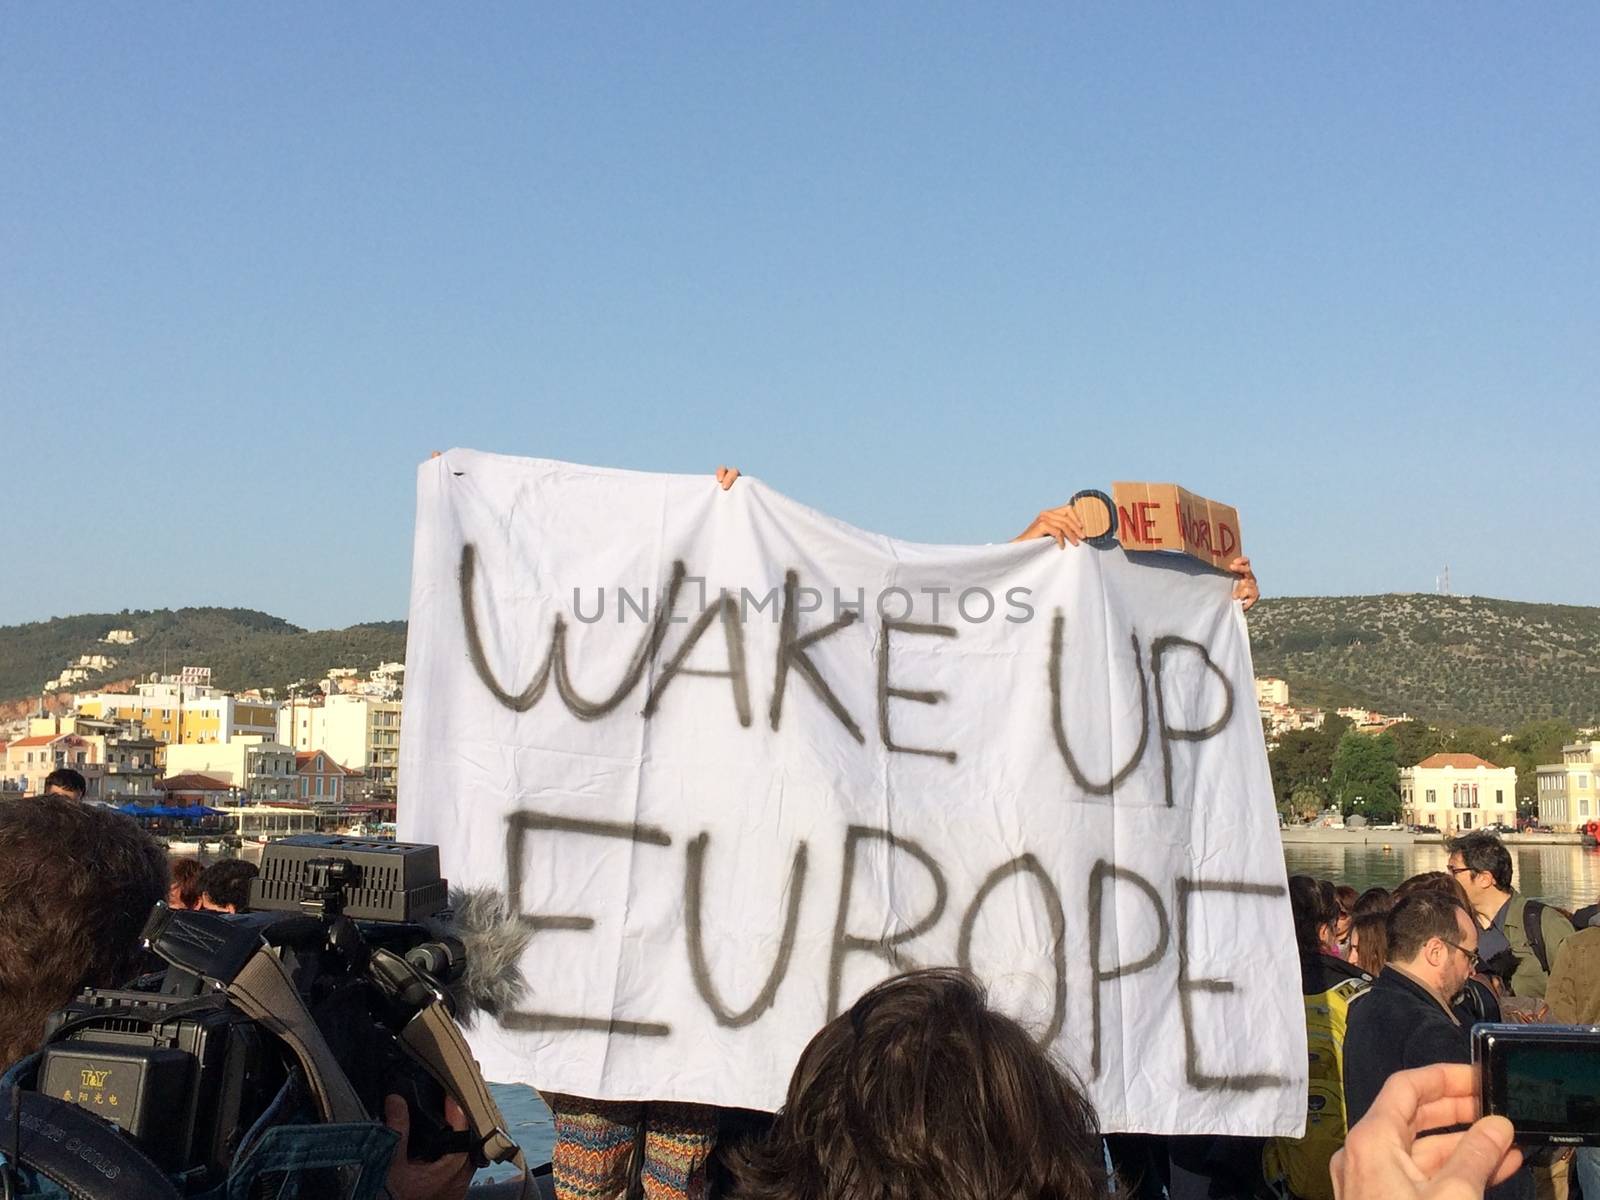 GREECE, Lesvos: A man holds a sign reading Wake up Europe at Lesvos harbour on April 4, 2016 as Greece sent a first wave of migrants back to Turkey the same day under an EU deal that has faced heavy criticism from rights groups. Under the agreement, designed to halt the main influx which comes from Turkey, all irregular migrants arriving since March 20 face being sent back, although the deal calls for each case to be examined individually. For every Syrian refugee returned, another Syrian refugee will be resettled from Turkey to the EU, with numbers capped at 72,000.